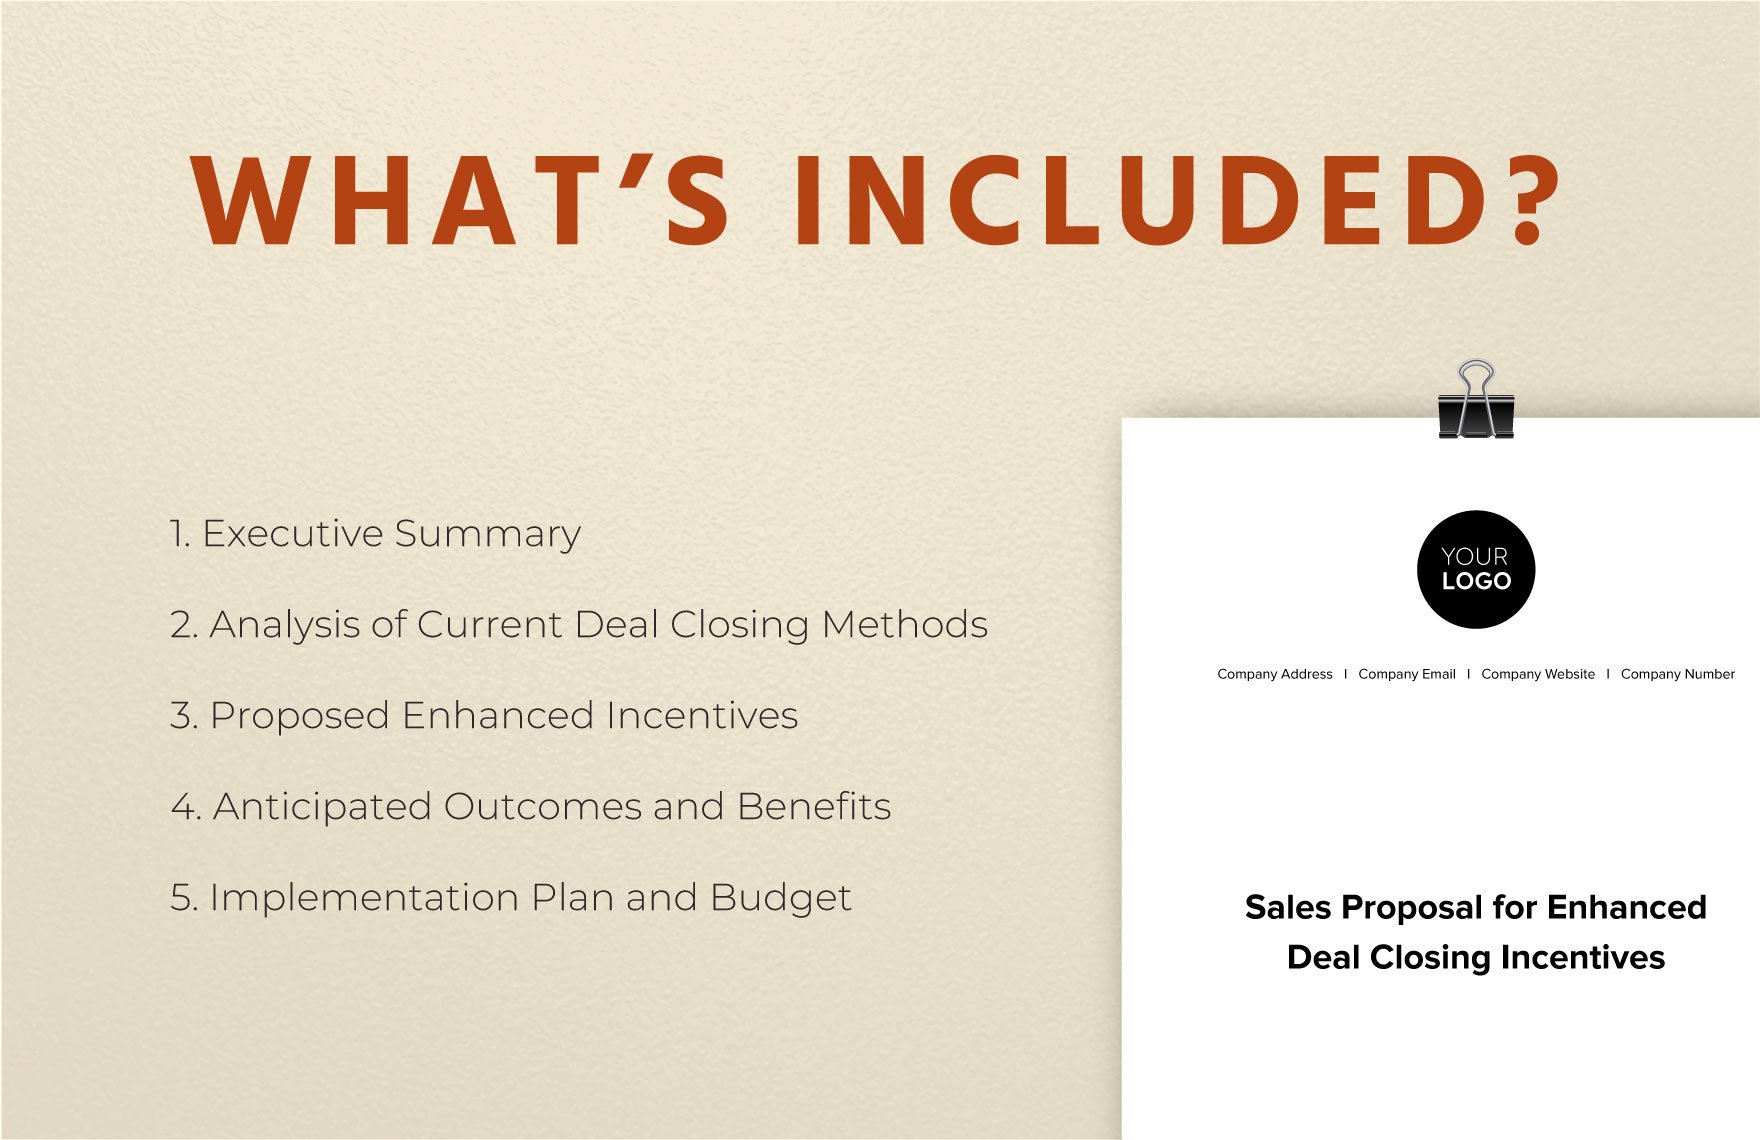 Sales Proposal for Enhanced Deal Closing Incentives Template